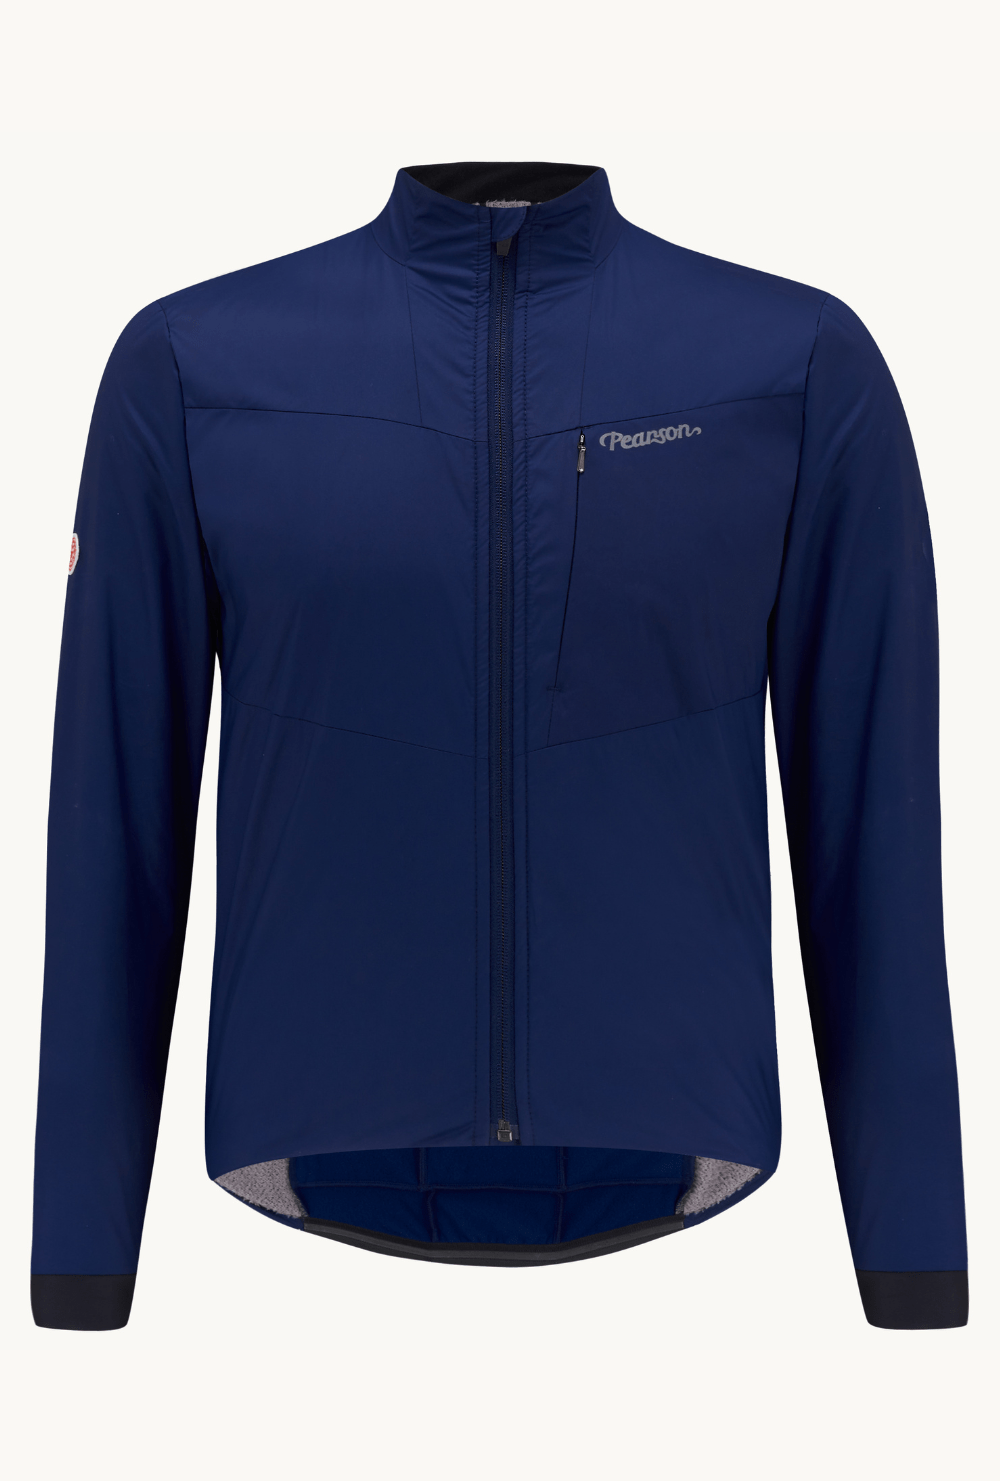 Pearson 1860  Test Your Mettle - Road Insulated Jacket Blue Ink  Blue Ink / Medium